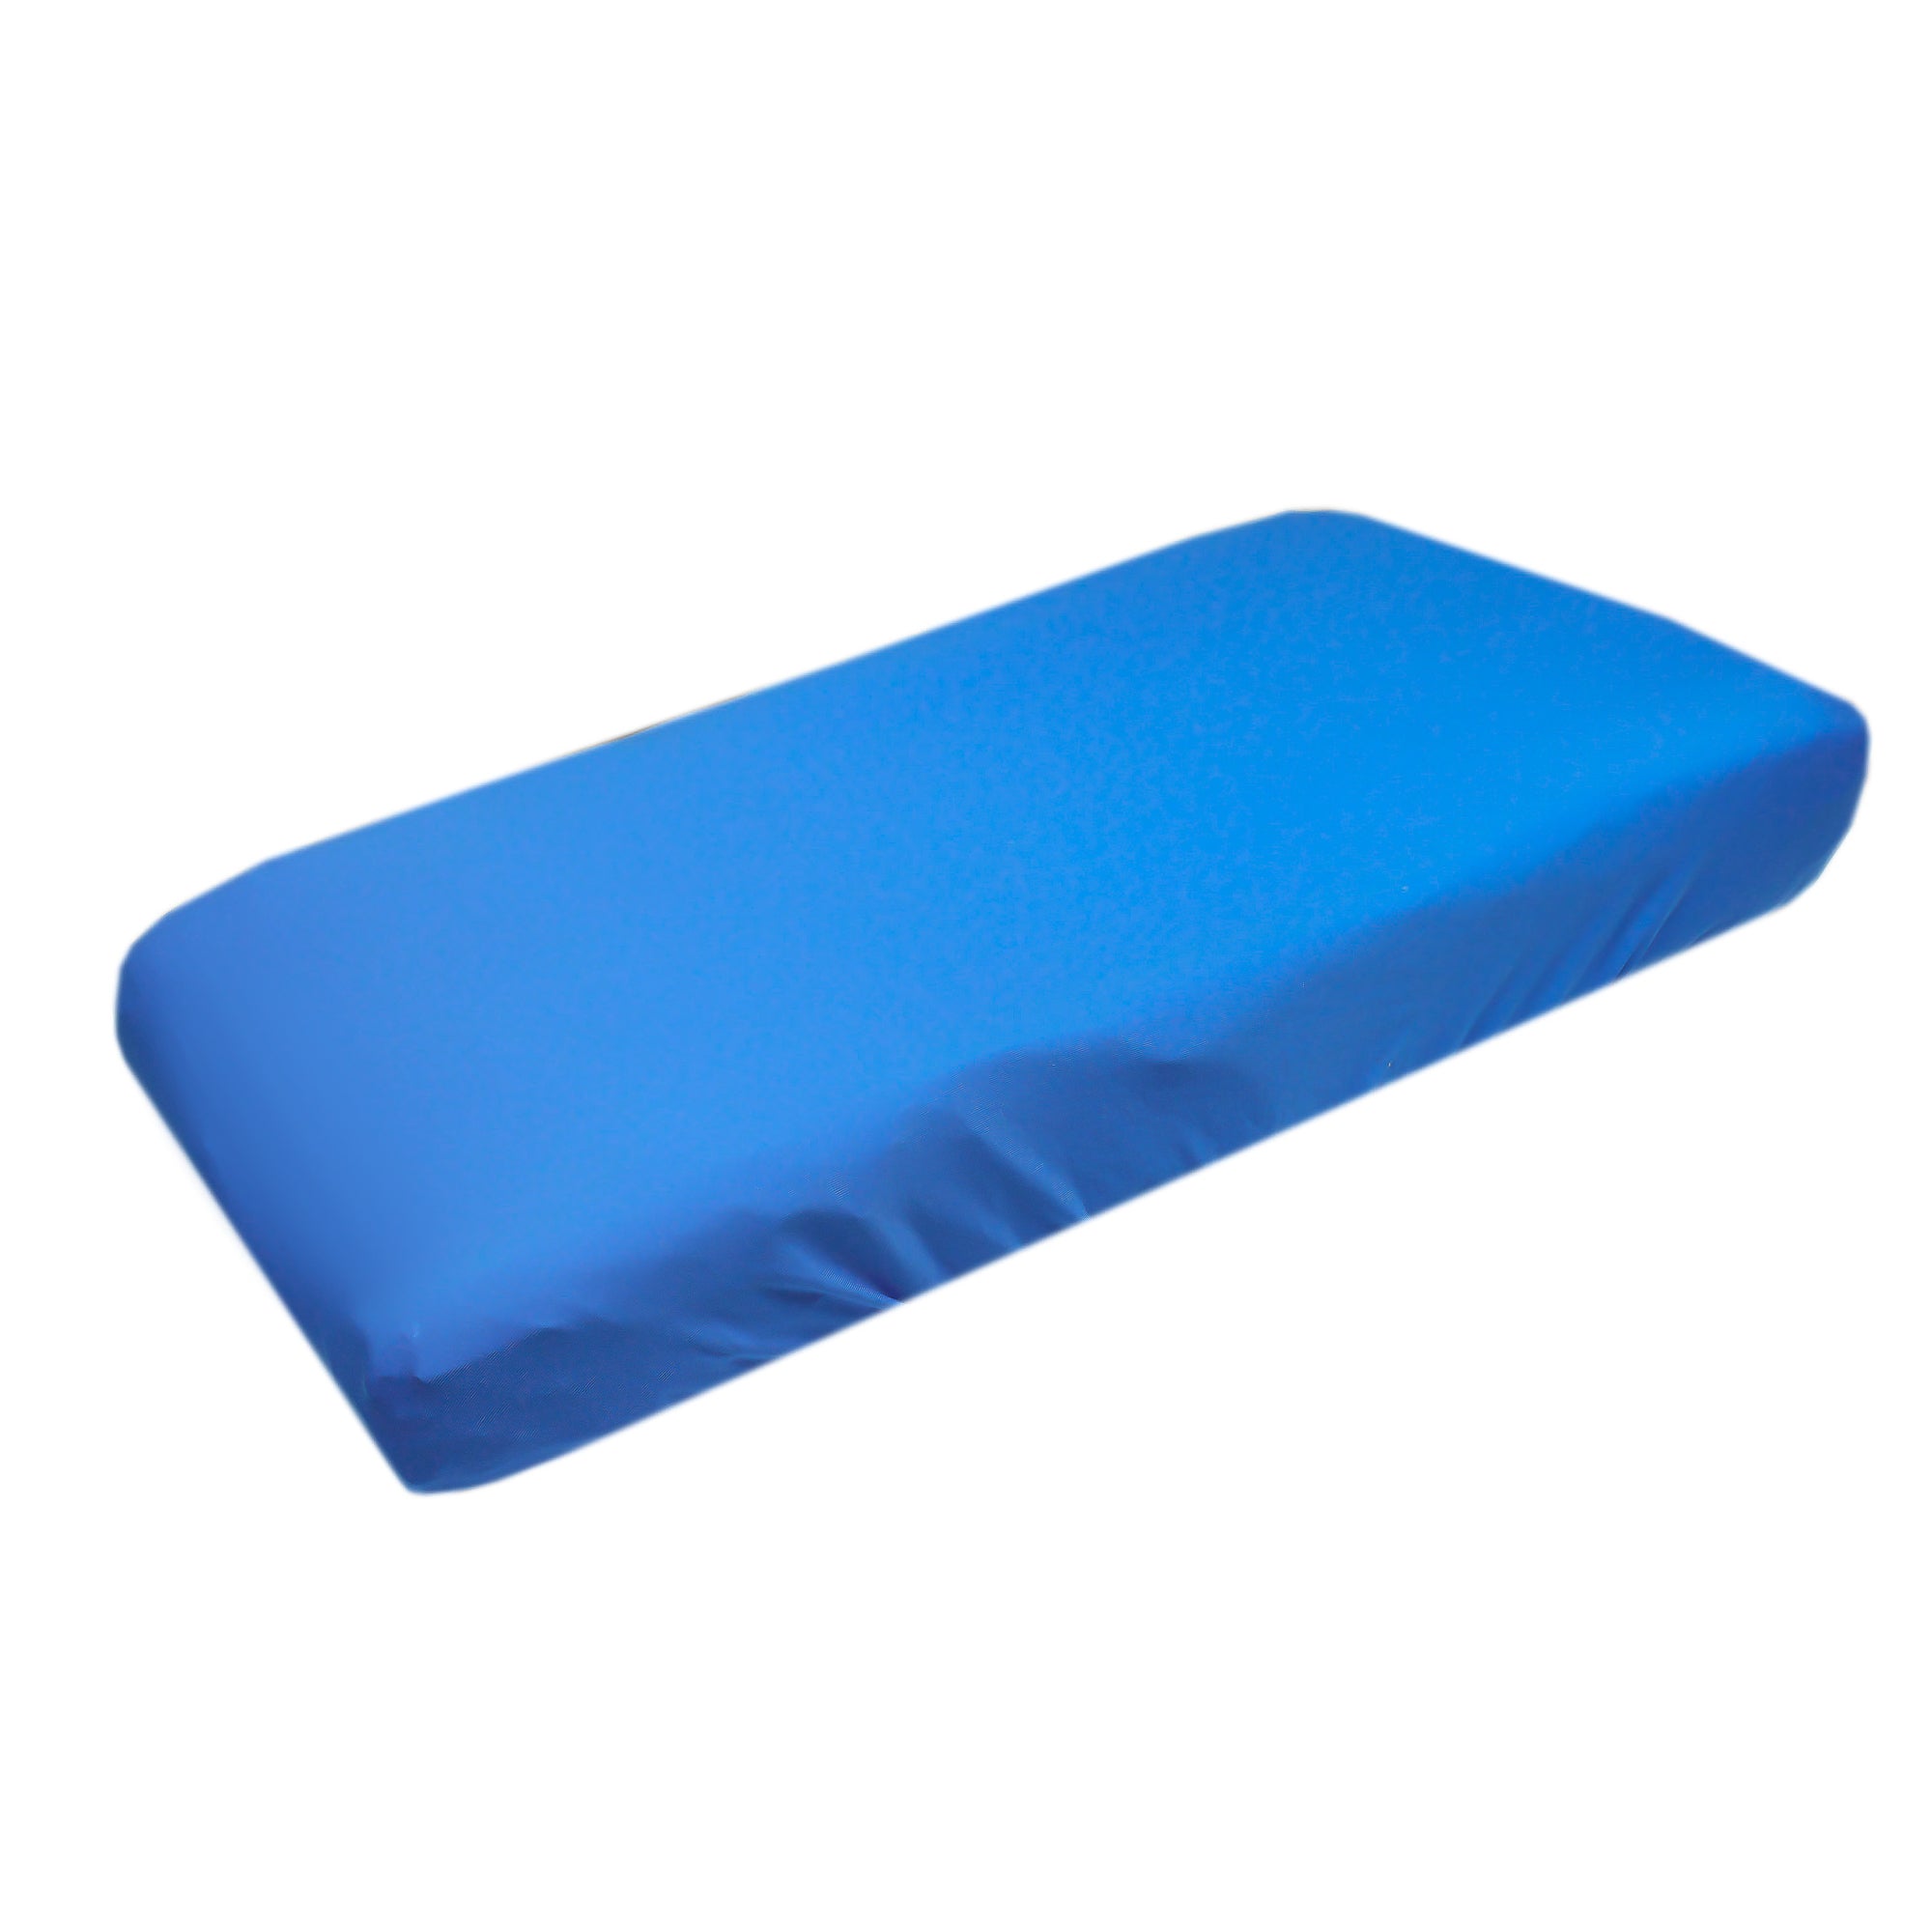 Premium Knit Diaper Changing Pad Cover - Blueberry